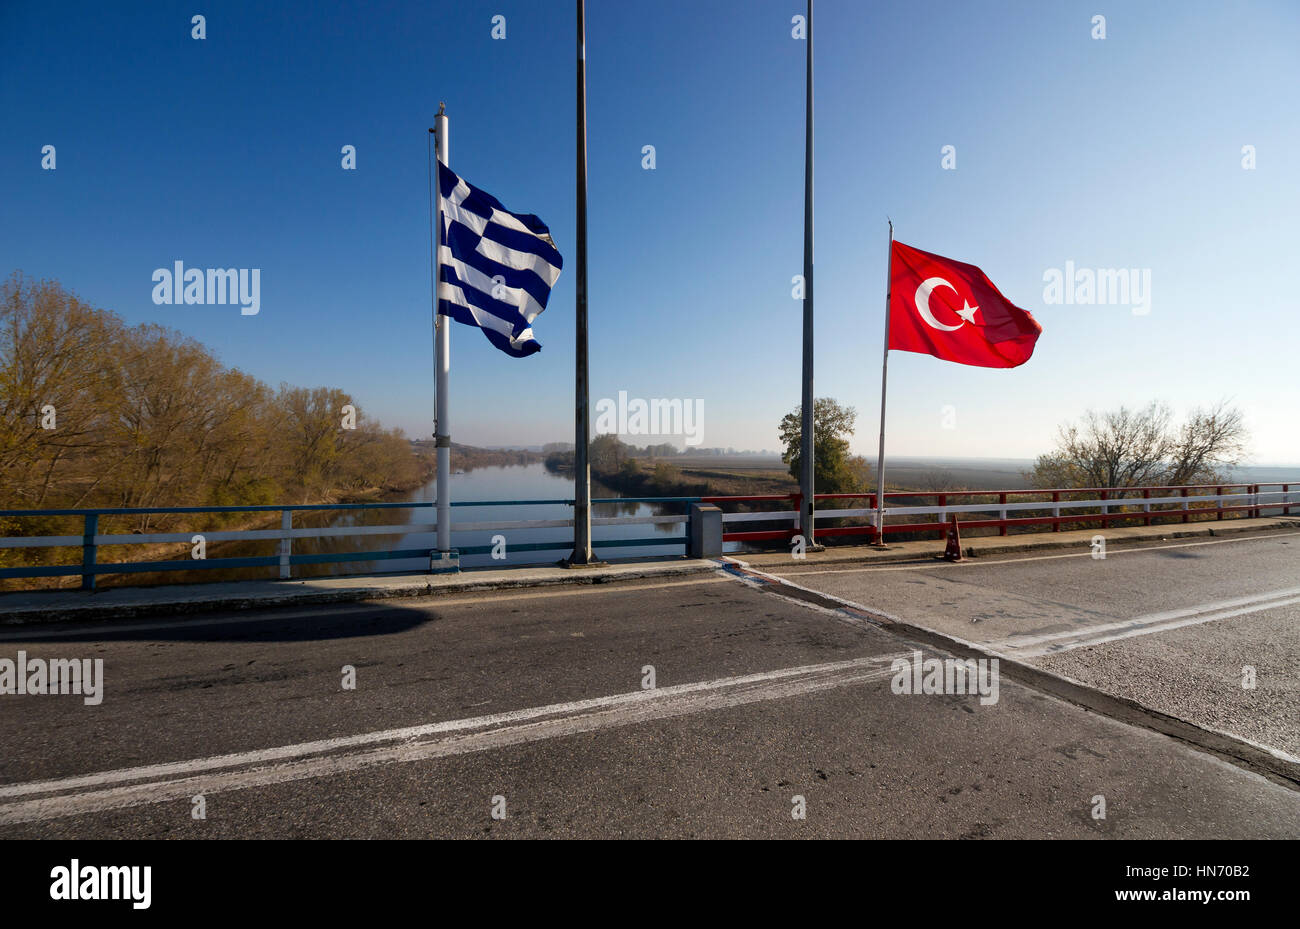 The borders between the countries Greece and Turkey, right on the